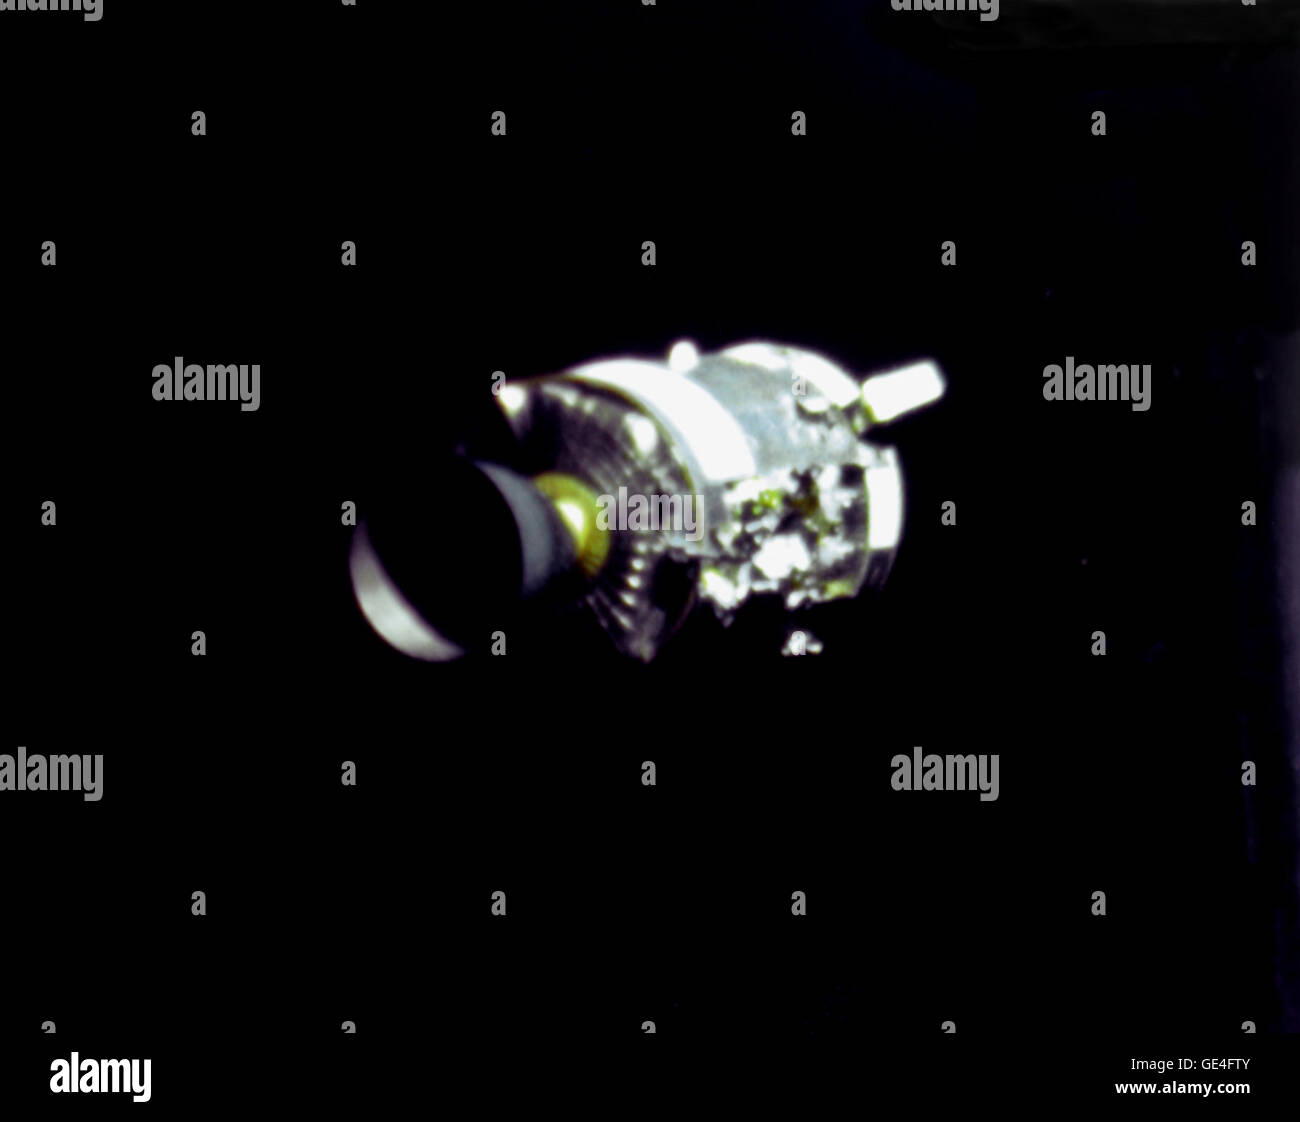 This view of the damaged Apollo 13 Service Module (SM) was photographed from the Lunar Module/Command Module following SM jettisoning. As seen here, an entire SM panel was blown away by the apparent explosion of oxygen tank number two located in Sector 4 of the SM. Two of the three fuel cells are visible just forward (above) the heavily damaged area. Three fuel cells, two oxygen tanks, and two hydrogen tanks are located in Sector 4. The damaged area is located above the S-Band high gain antenna. Nearest the camera is the Service Propulsion System (SPS) engine and nozzle. The damage to the SM c Stock Photo